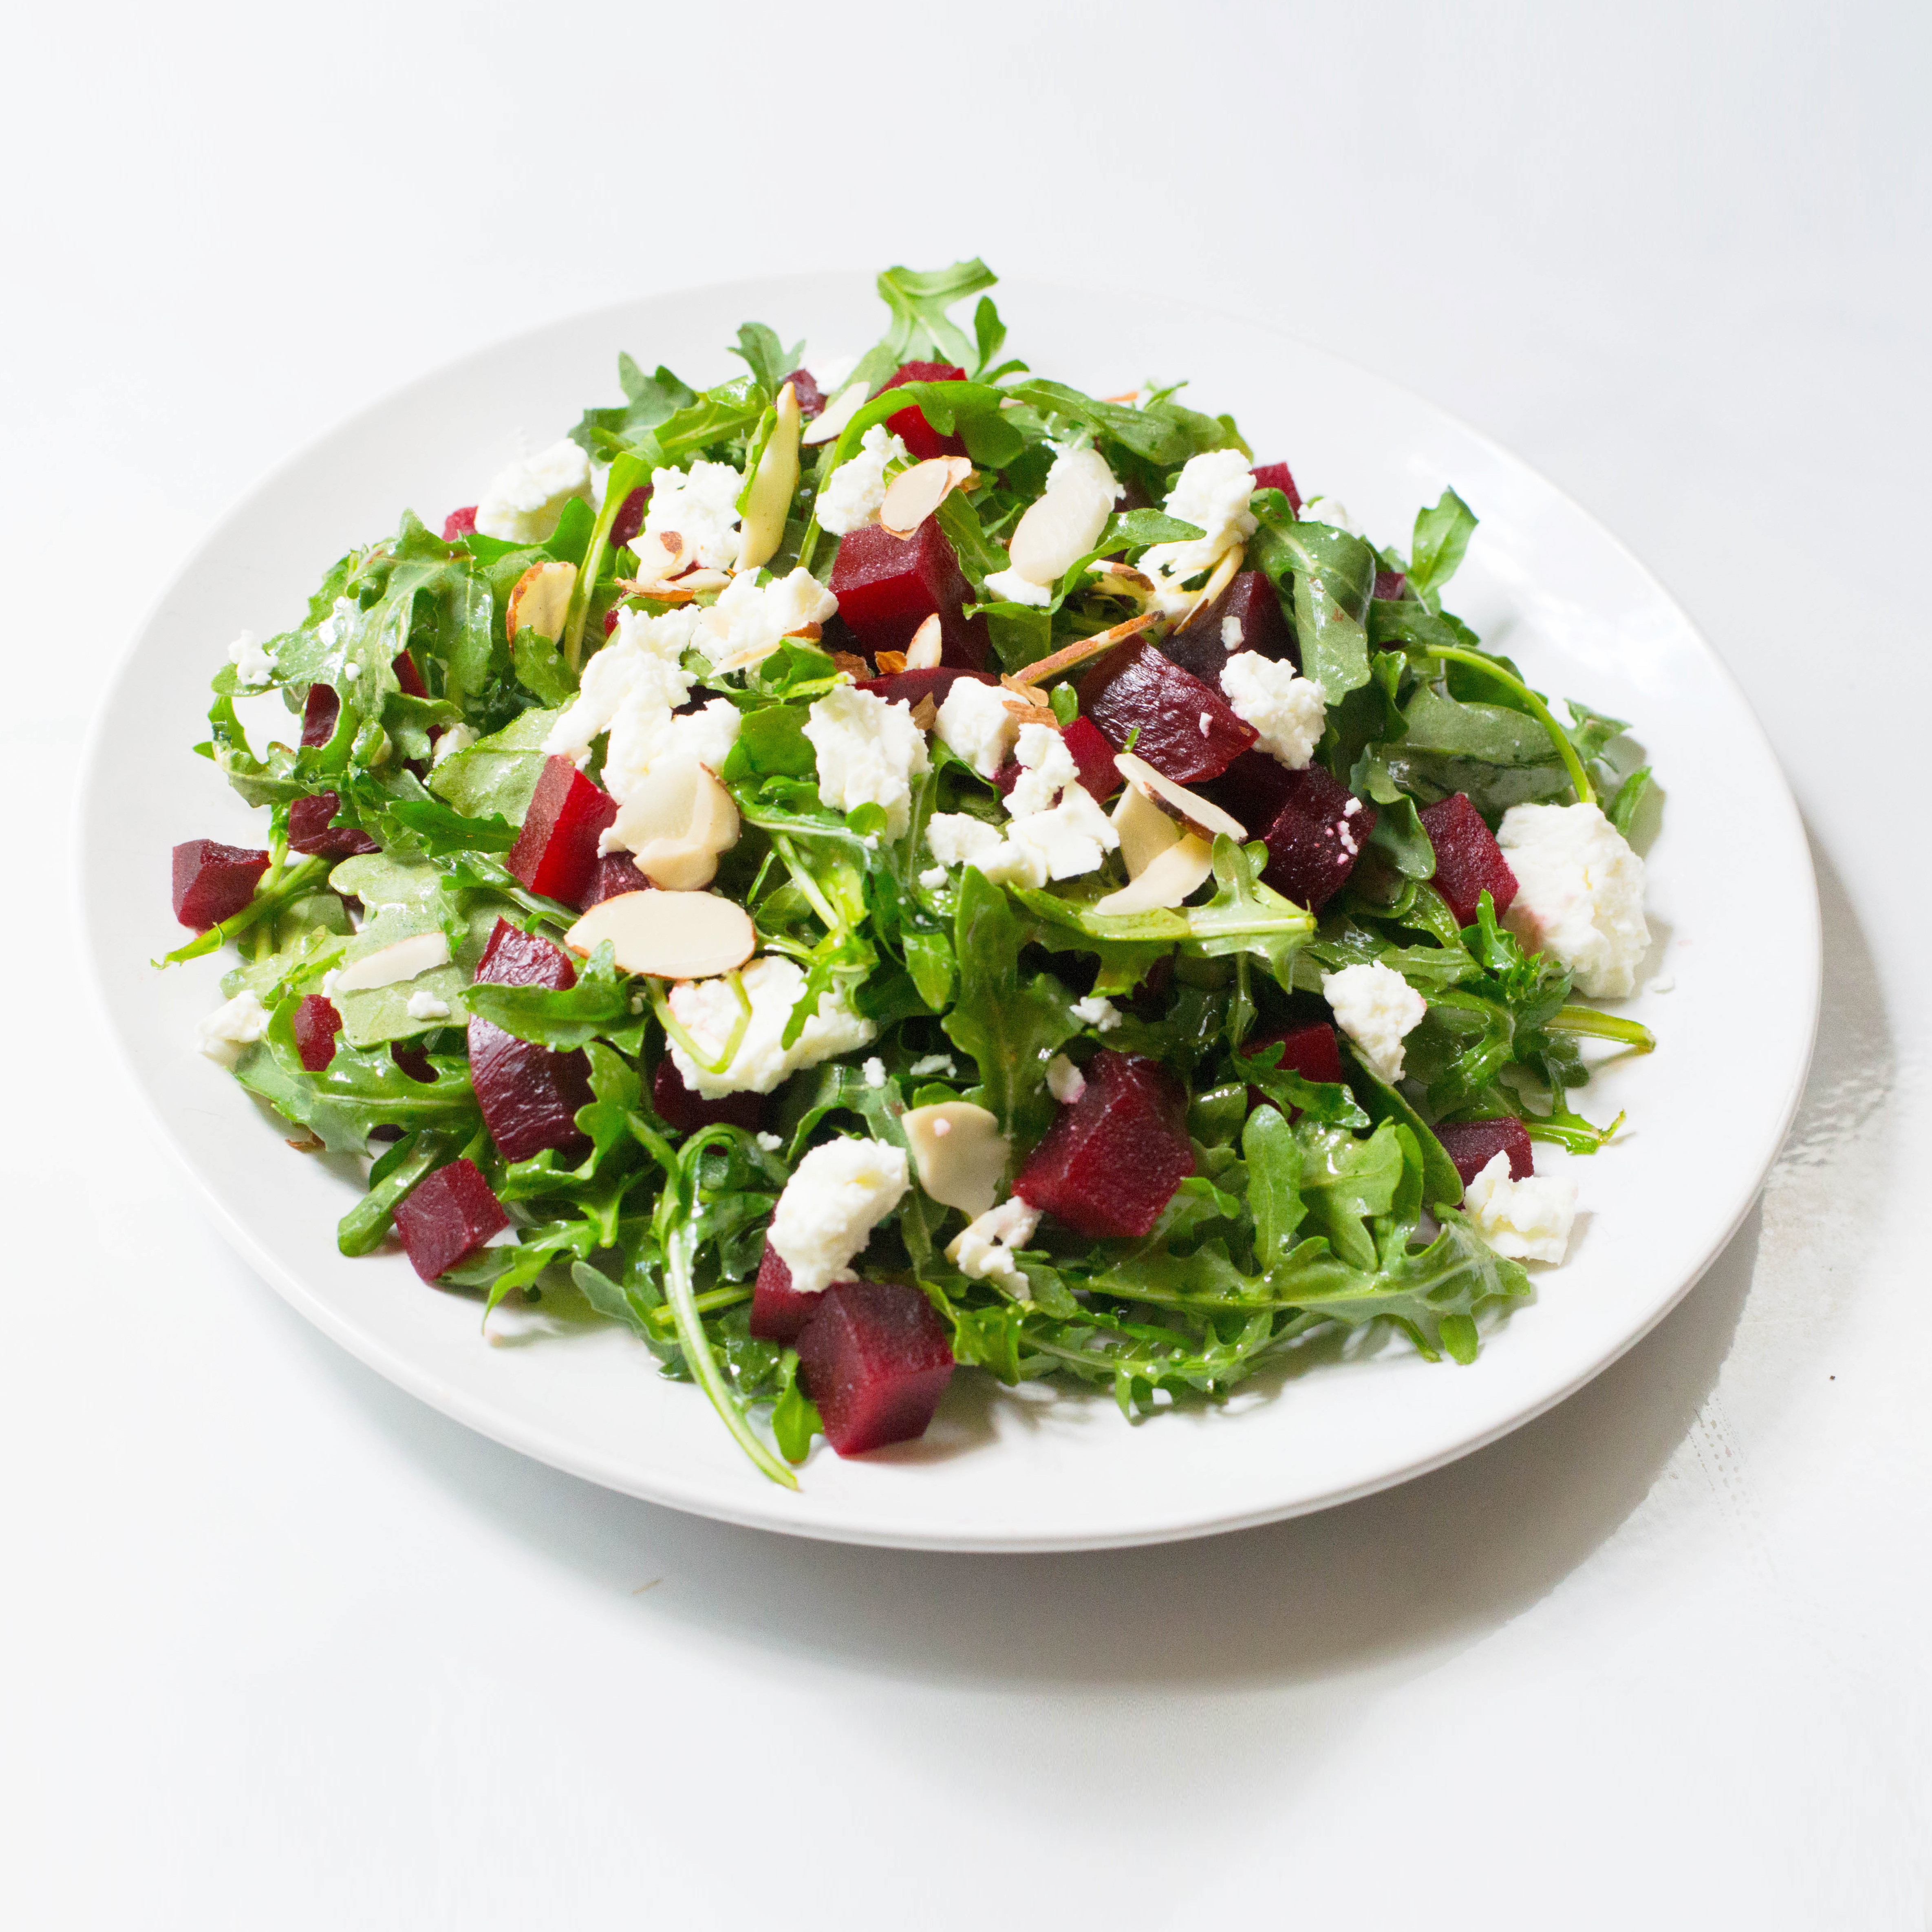 Quick and Easy Beet, Arugula, and Goat Cheese Salad